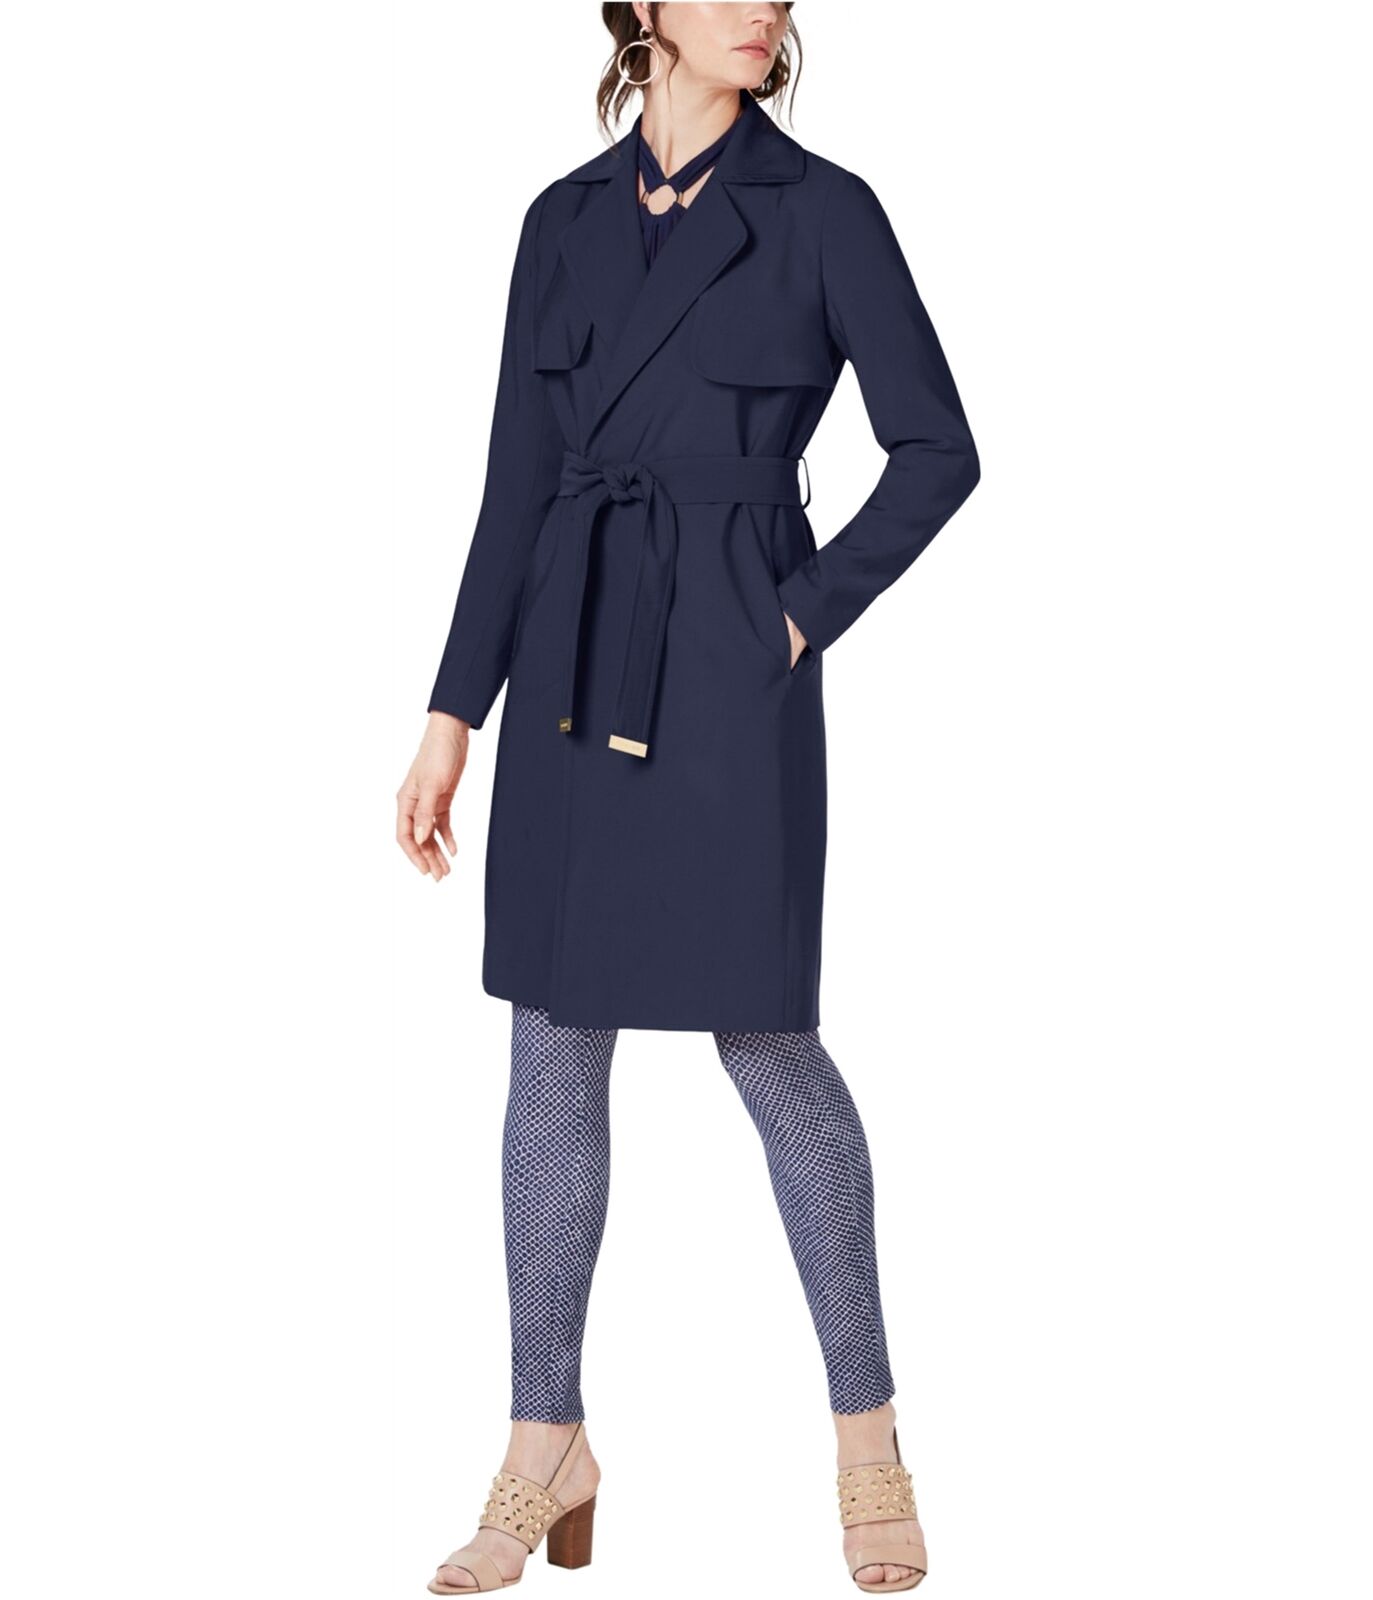 Michael Kors Womens Belted Trench Coat, Blue, Small